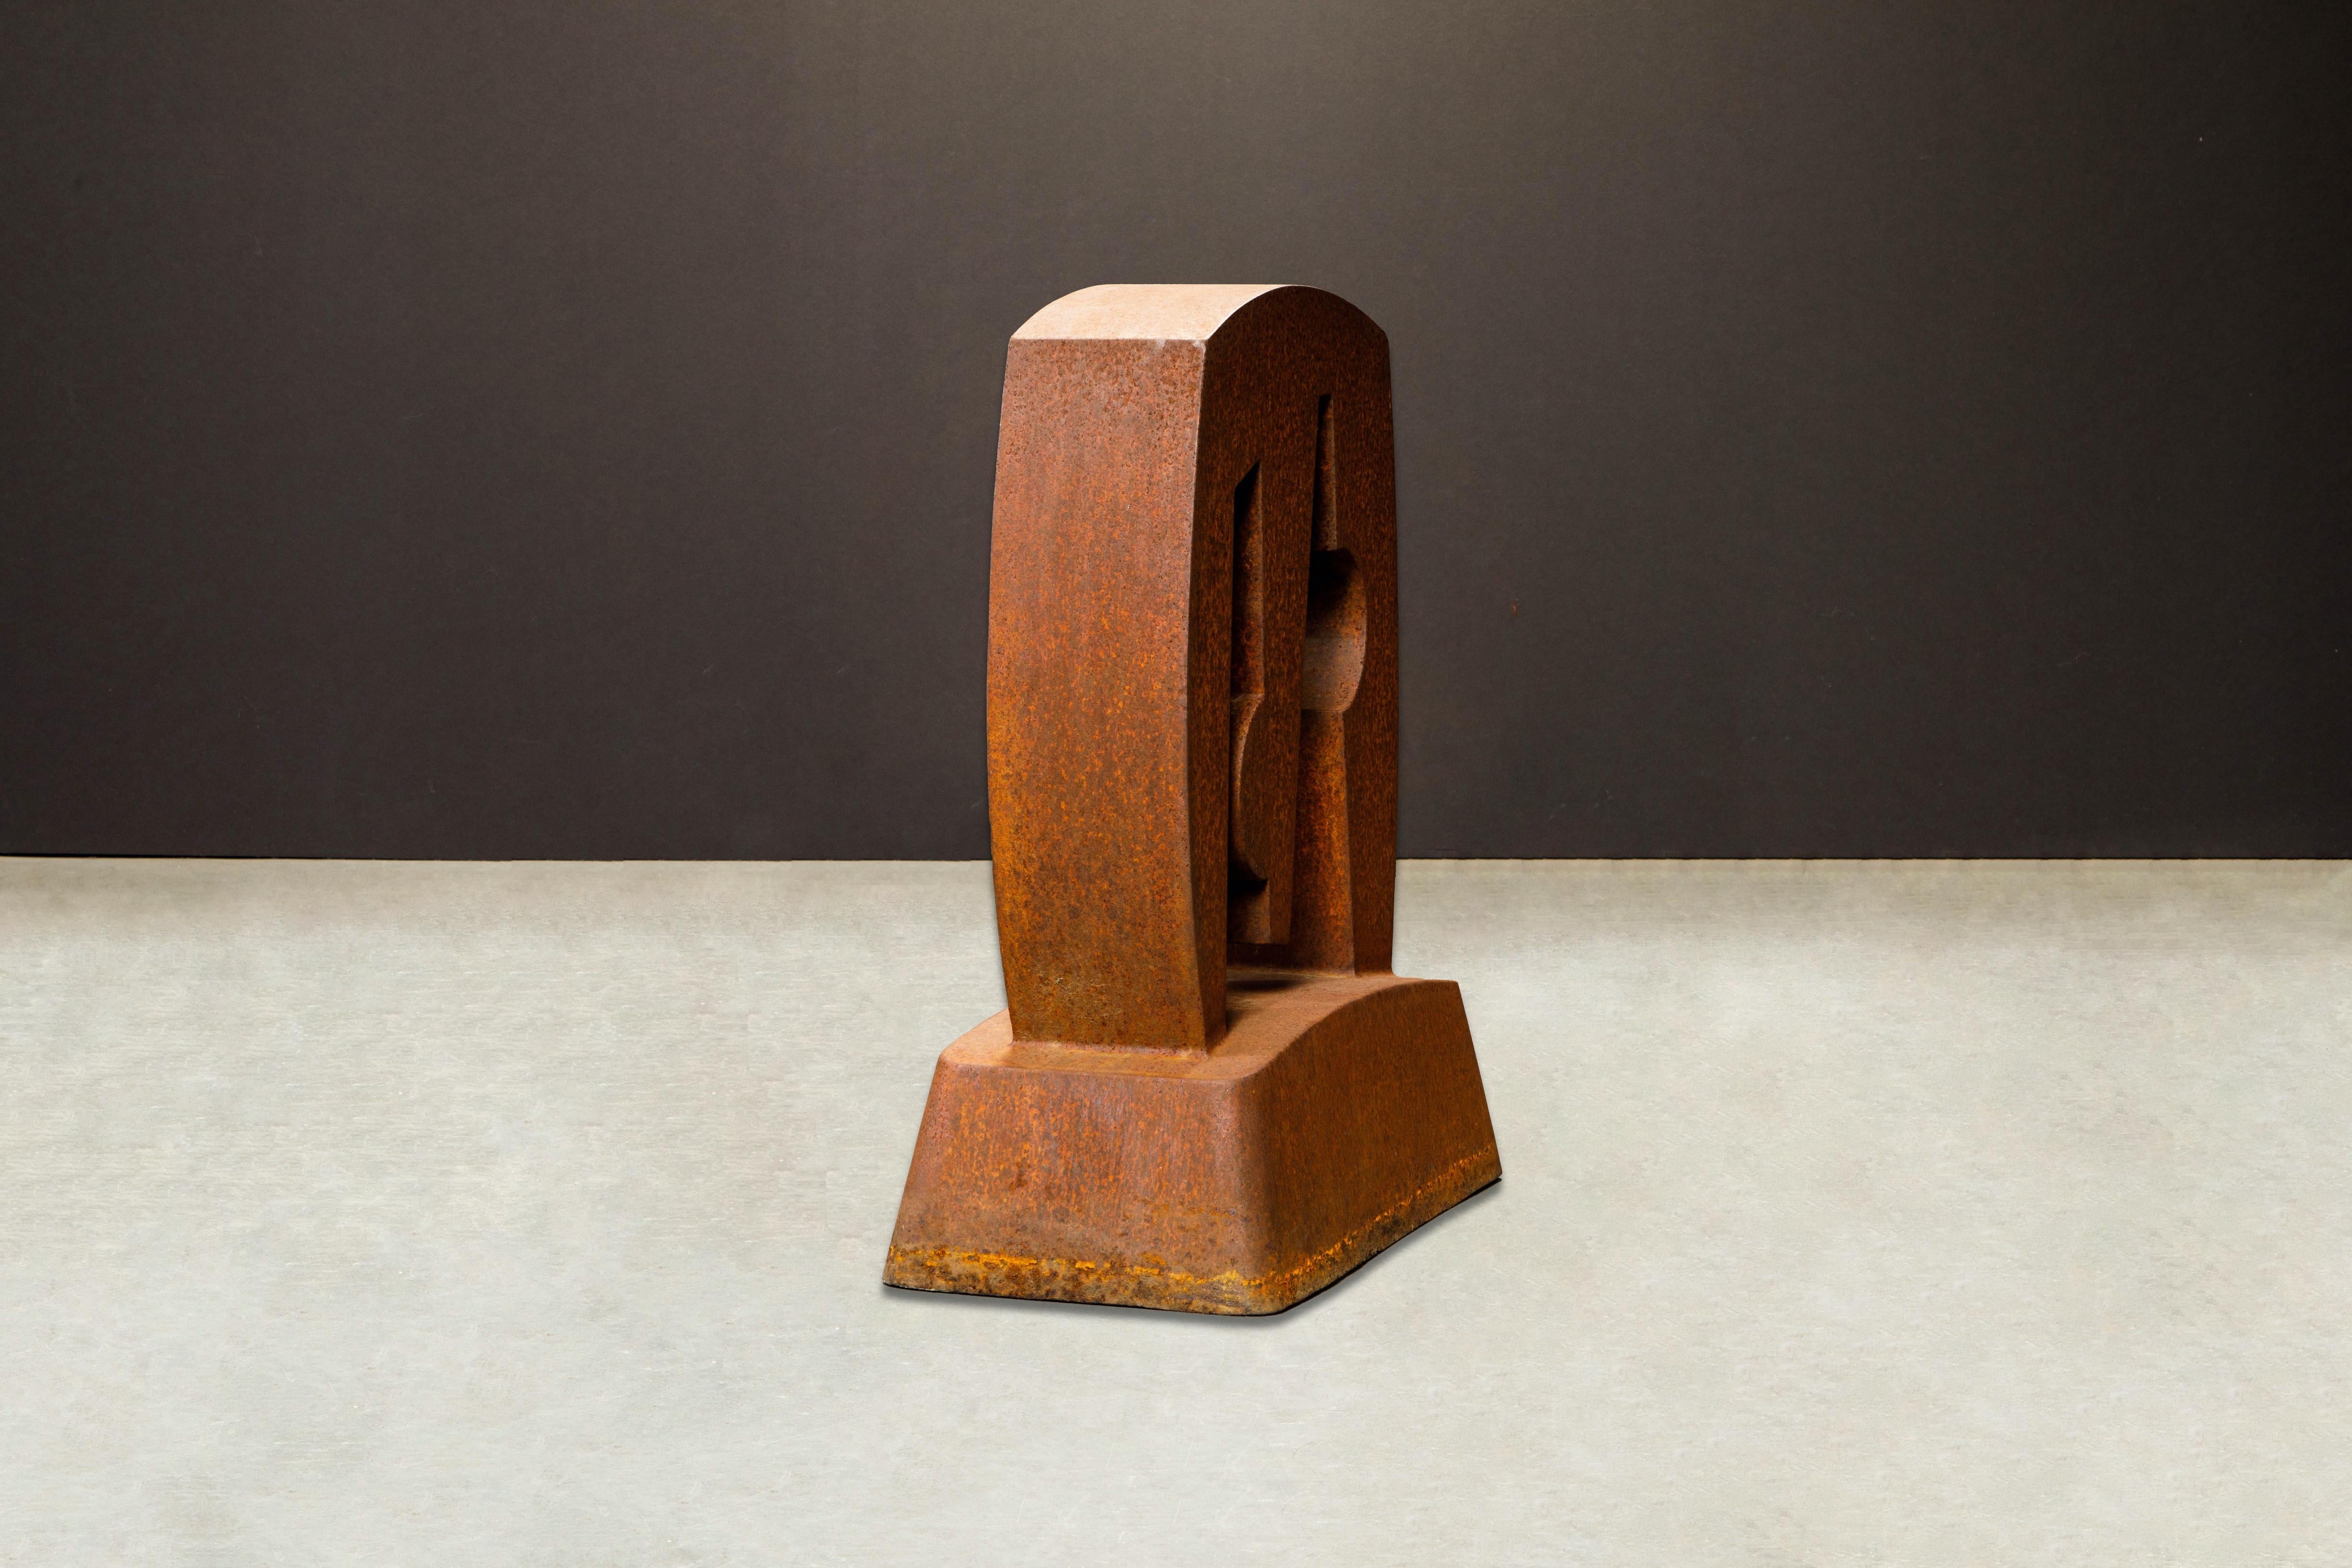 American Patinated Steel Sculpture by Arnie Garborg, Signed and Dated 1997